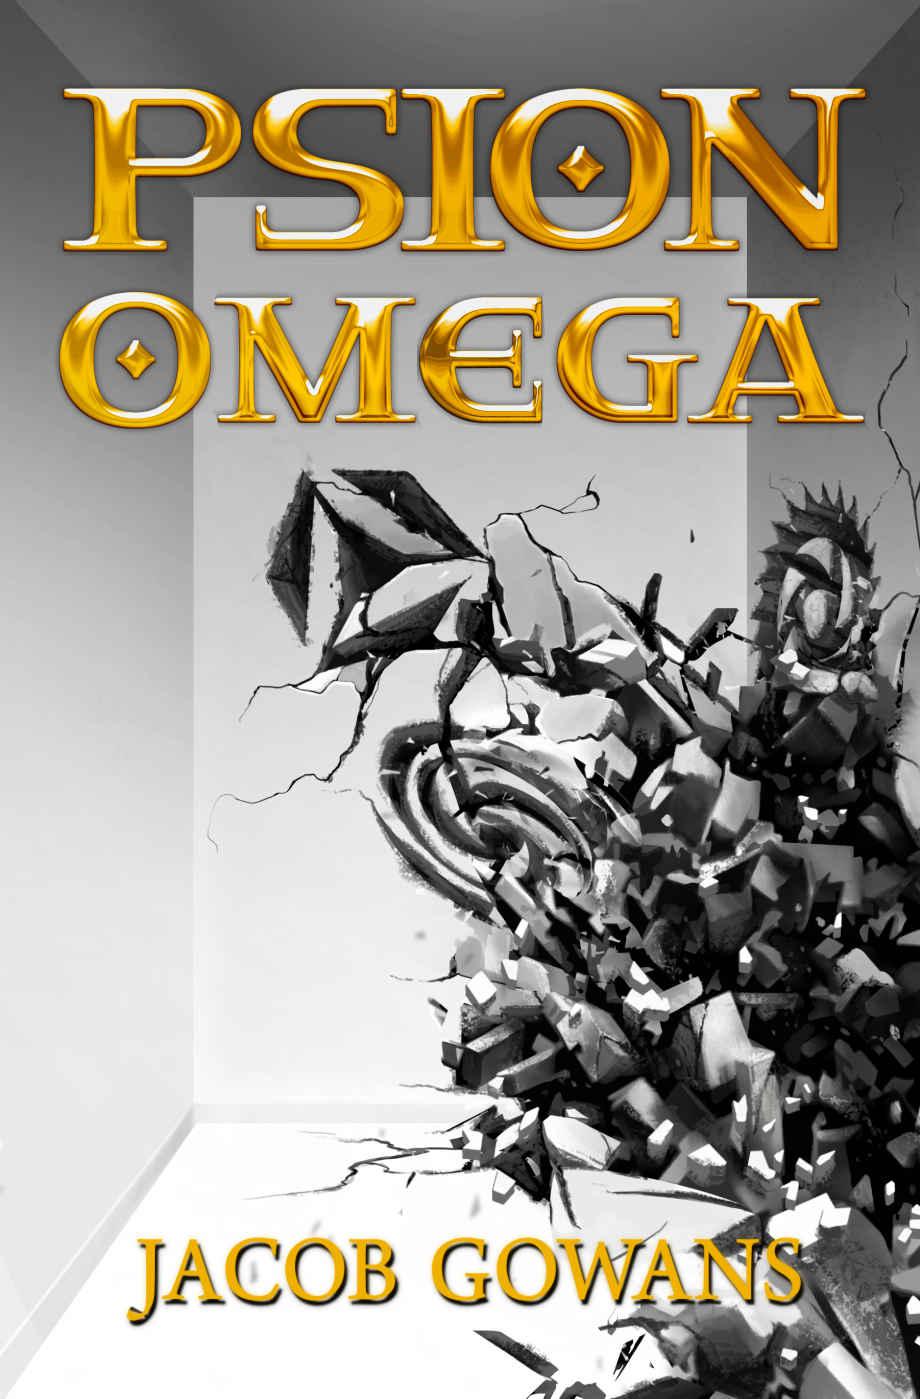 Psion Omega (Psion series Book 5) by Jacob Gowans